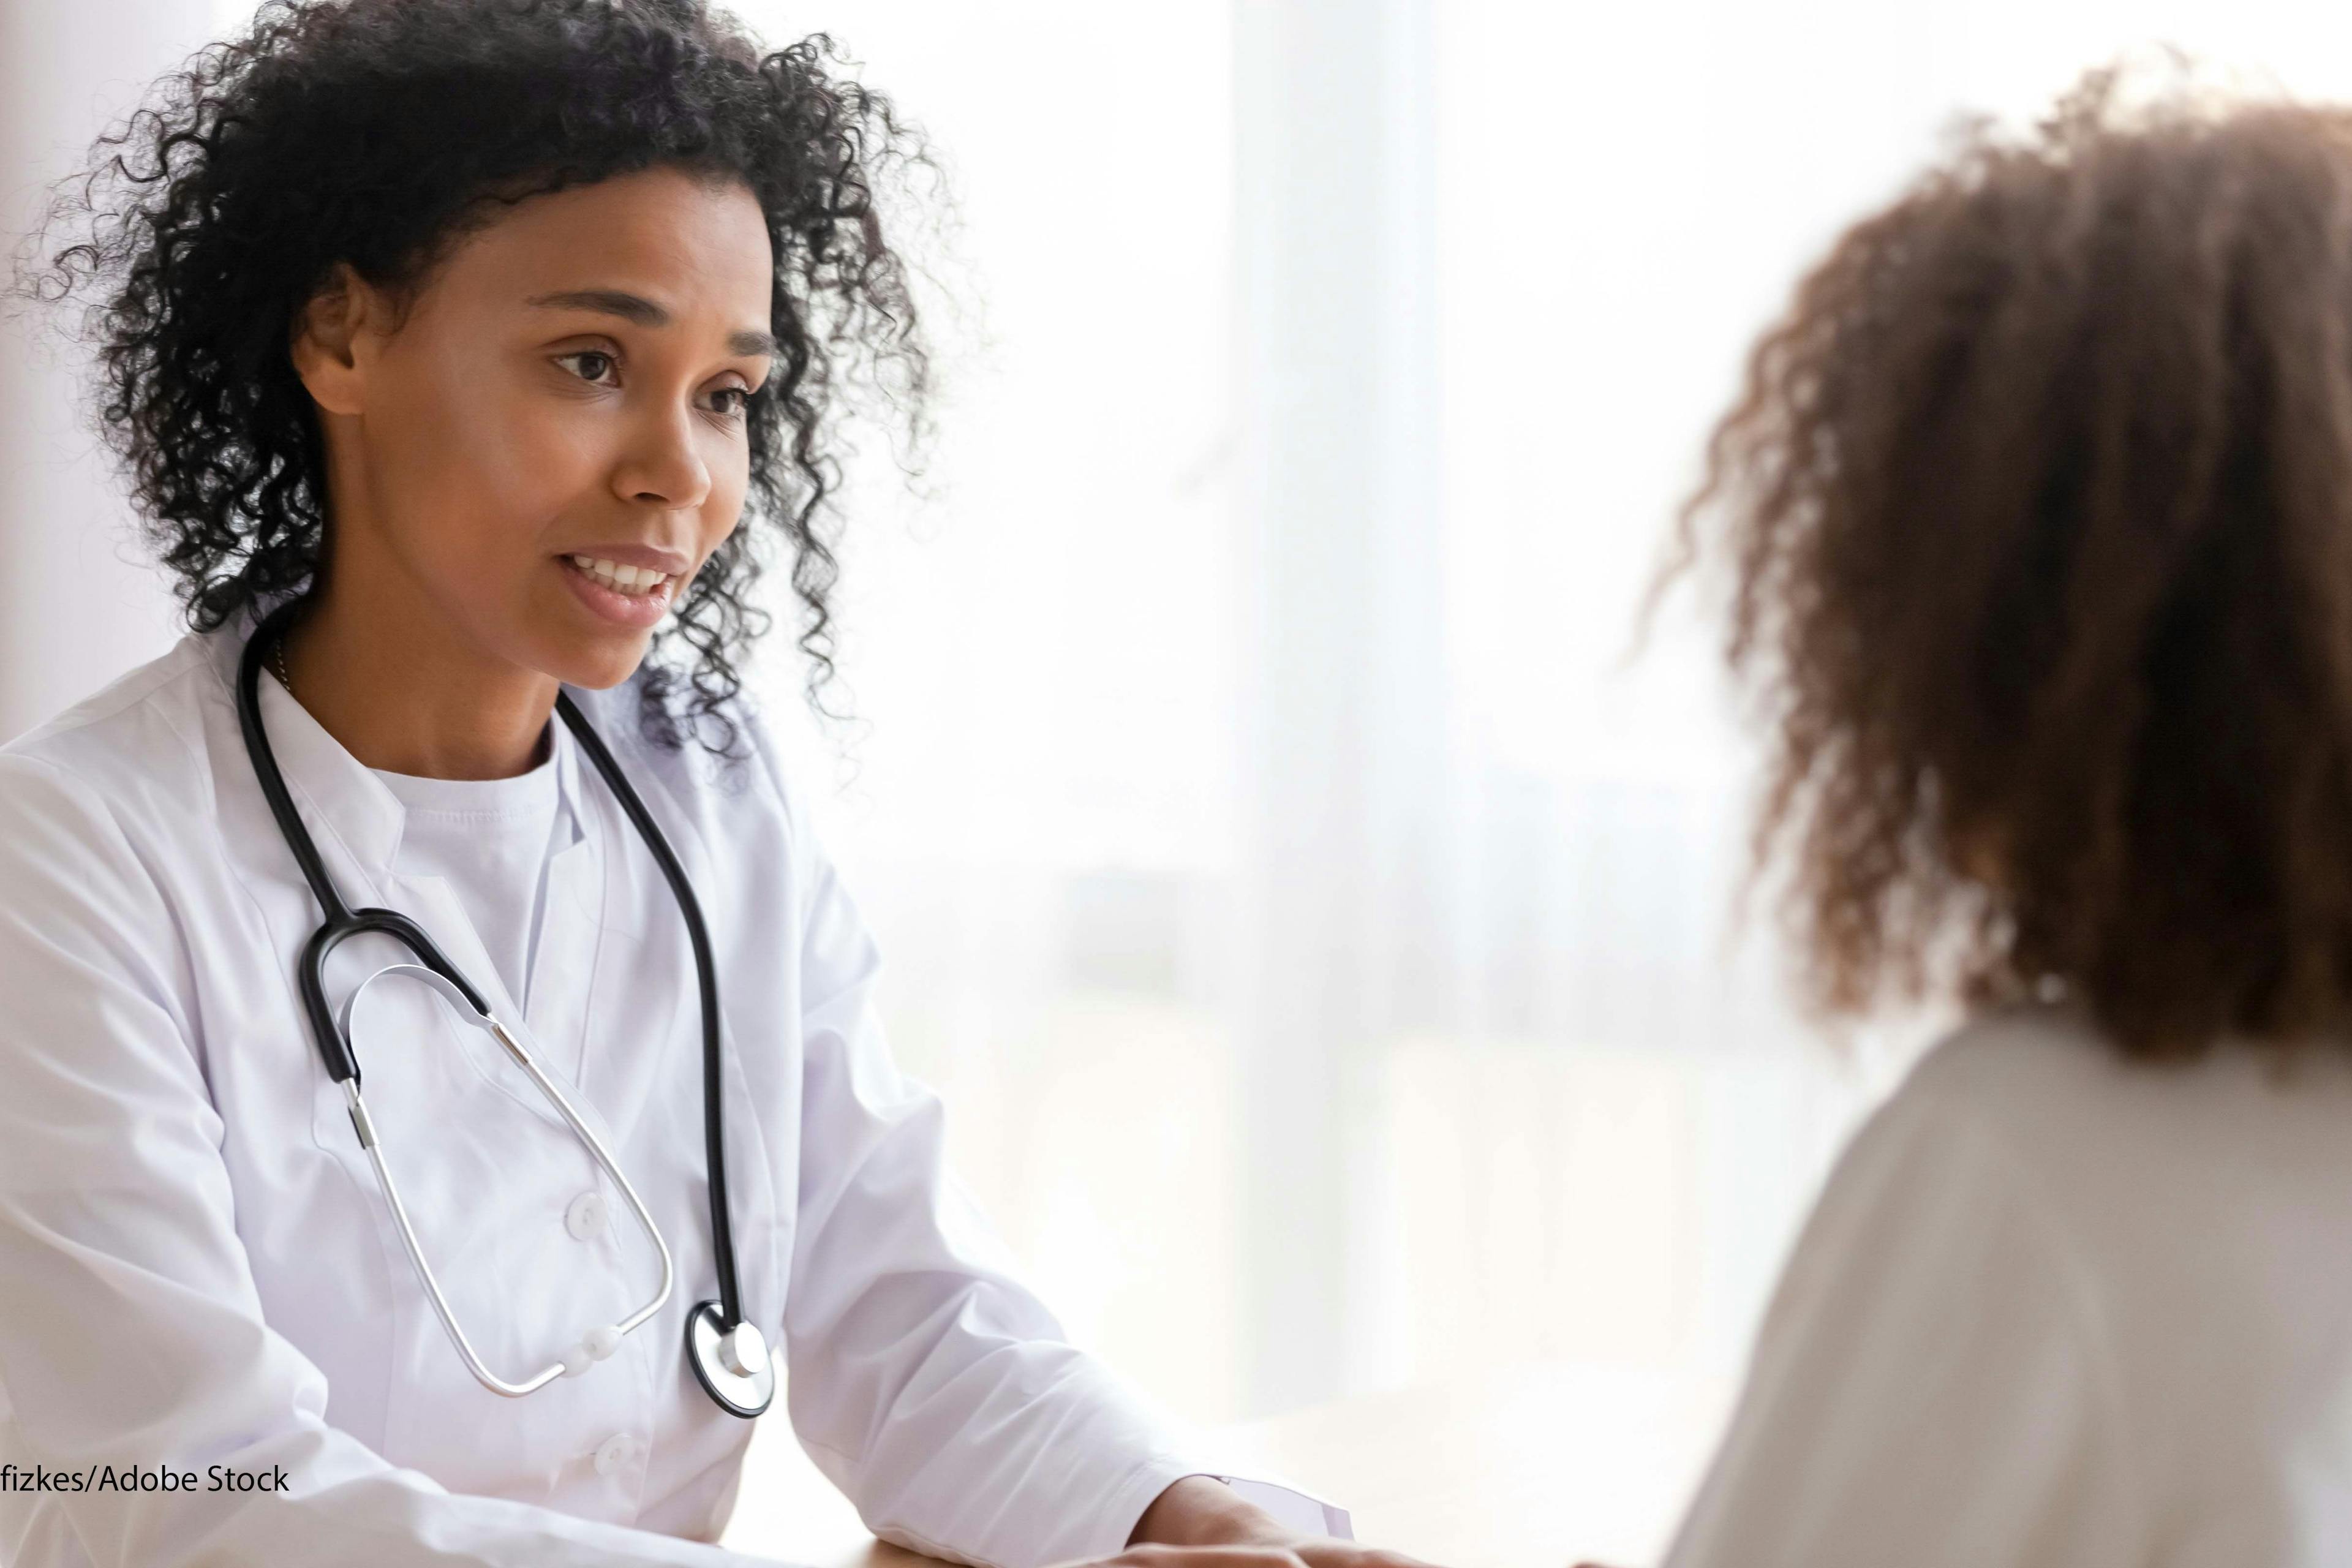 Comprehensive Cancer Center Consultations May Improve Breast Cancer Care for African American Women